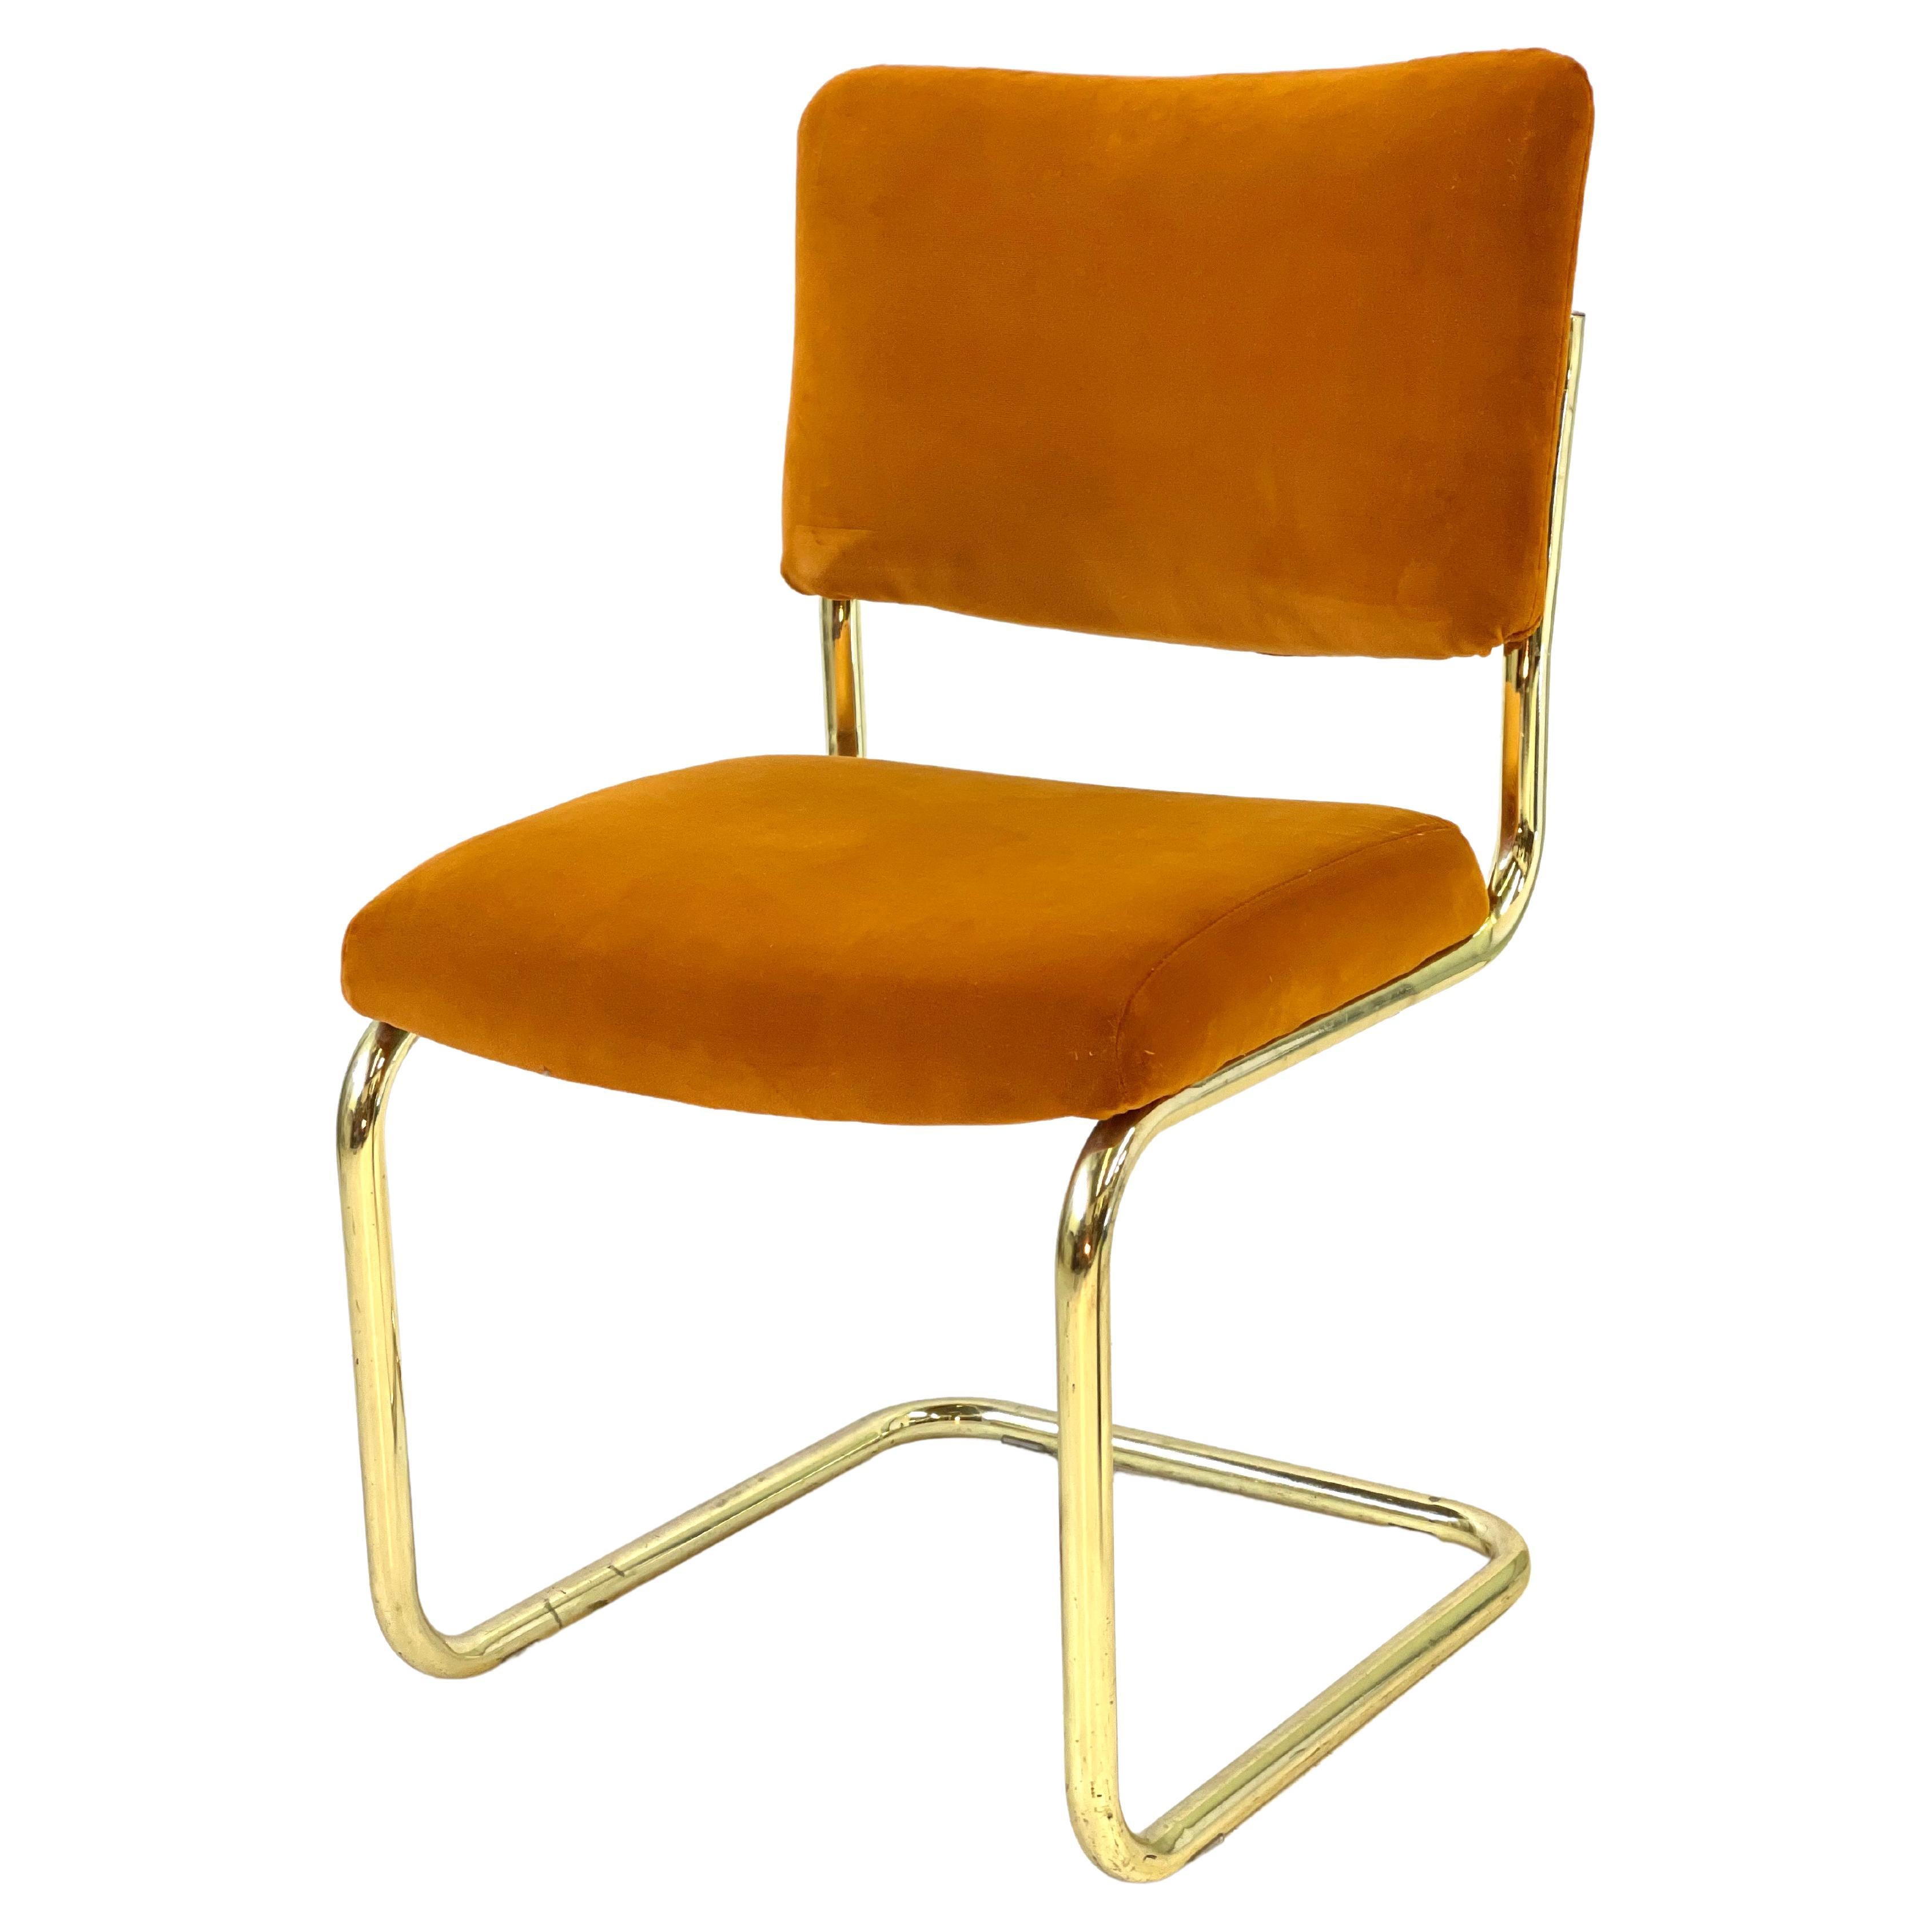 Classic mid-century style cantilever side chair with tubular brass frame manufactured by Chromcraft. The chair seat and back have been newly upholstered in a pumpkin Jim Thompson velvet. This would make a lovely occasional chair or home office chair!